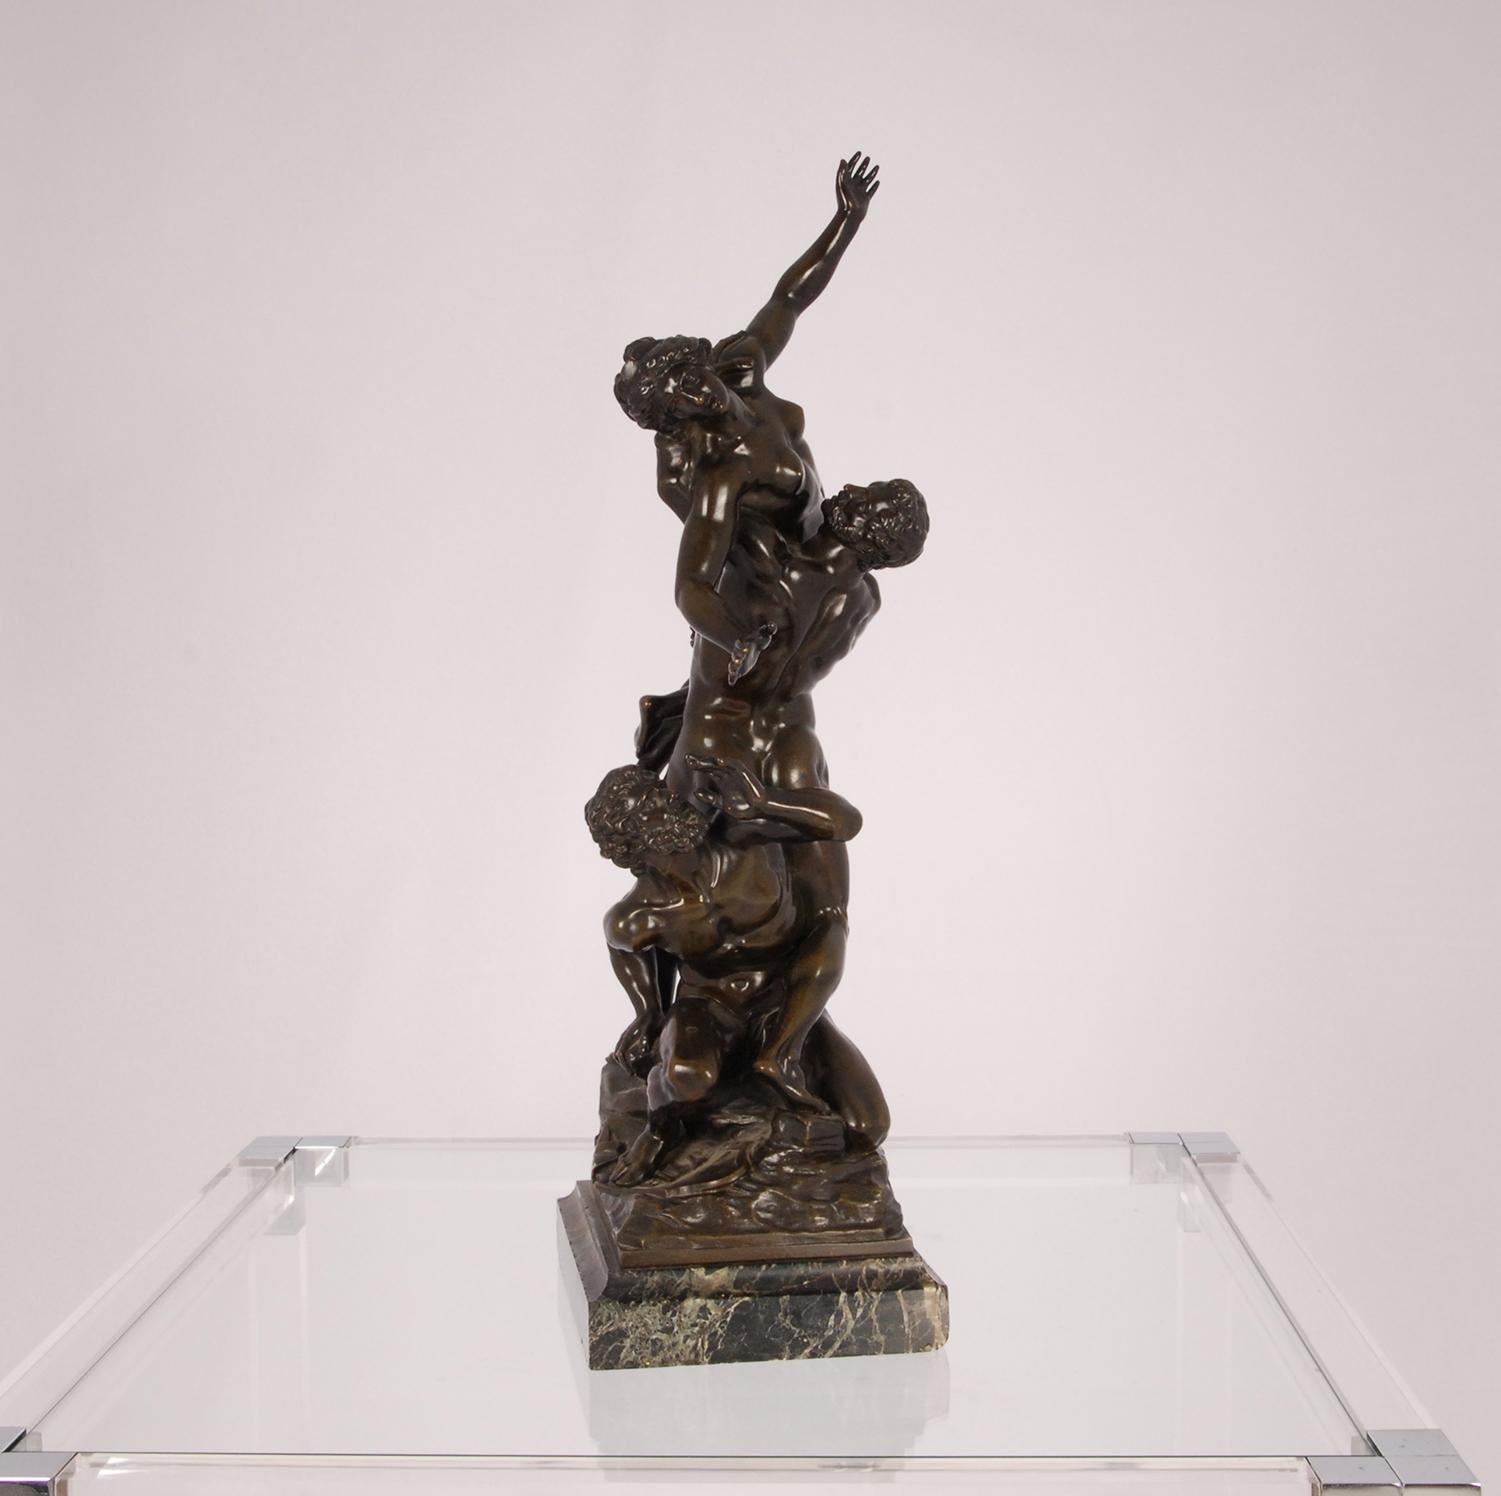 Patinated bronze sculpture - statue on a marble base
Depicting: The abduction of Sabine women, mythological Roman scene from the renaissance period.
Very detailed bronze sculpture A quality with a gorgeous time gained patina
Made and stamped by